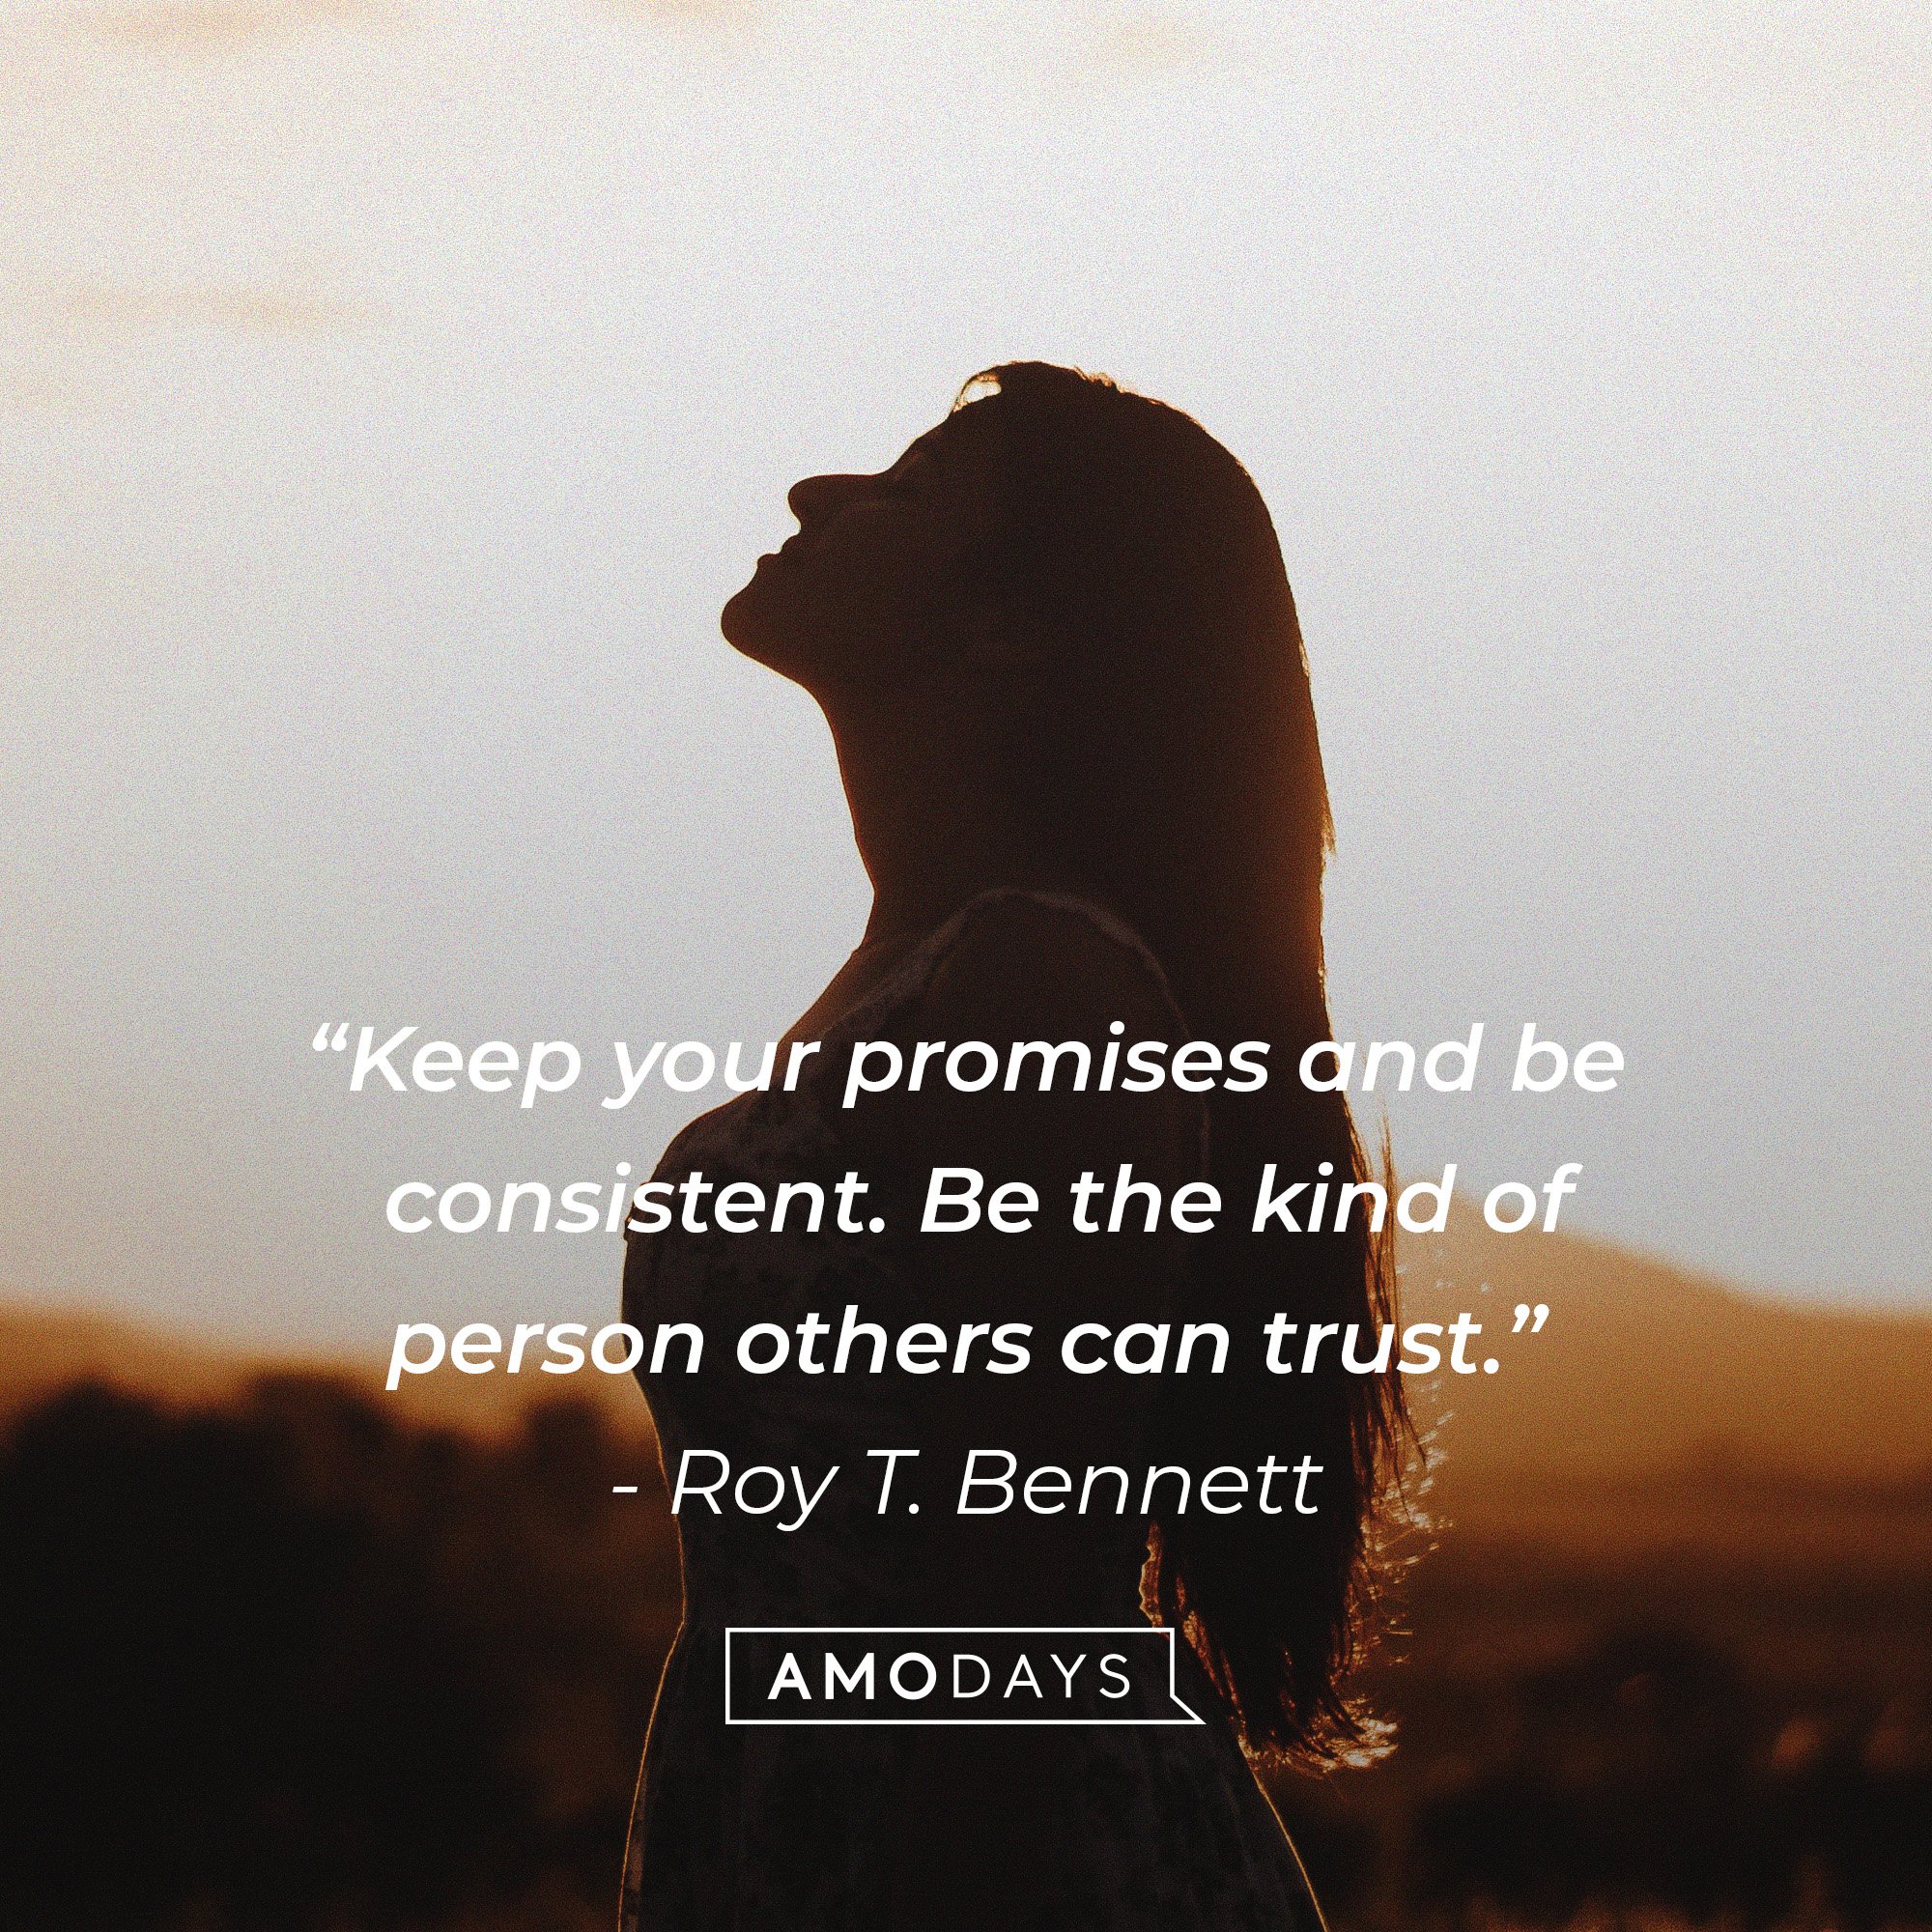  Roy T. Bennett’s quote: “Keep your promises and be consistent. Be the kind of person others can trust.” | Image: AmoDays  